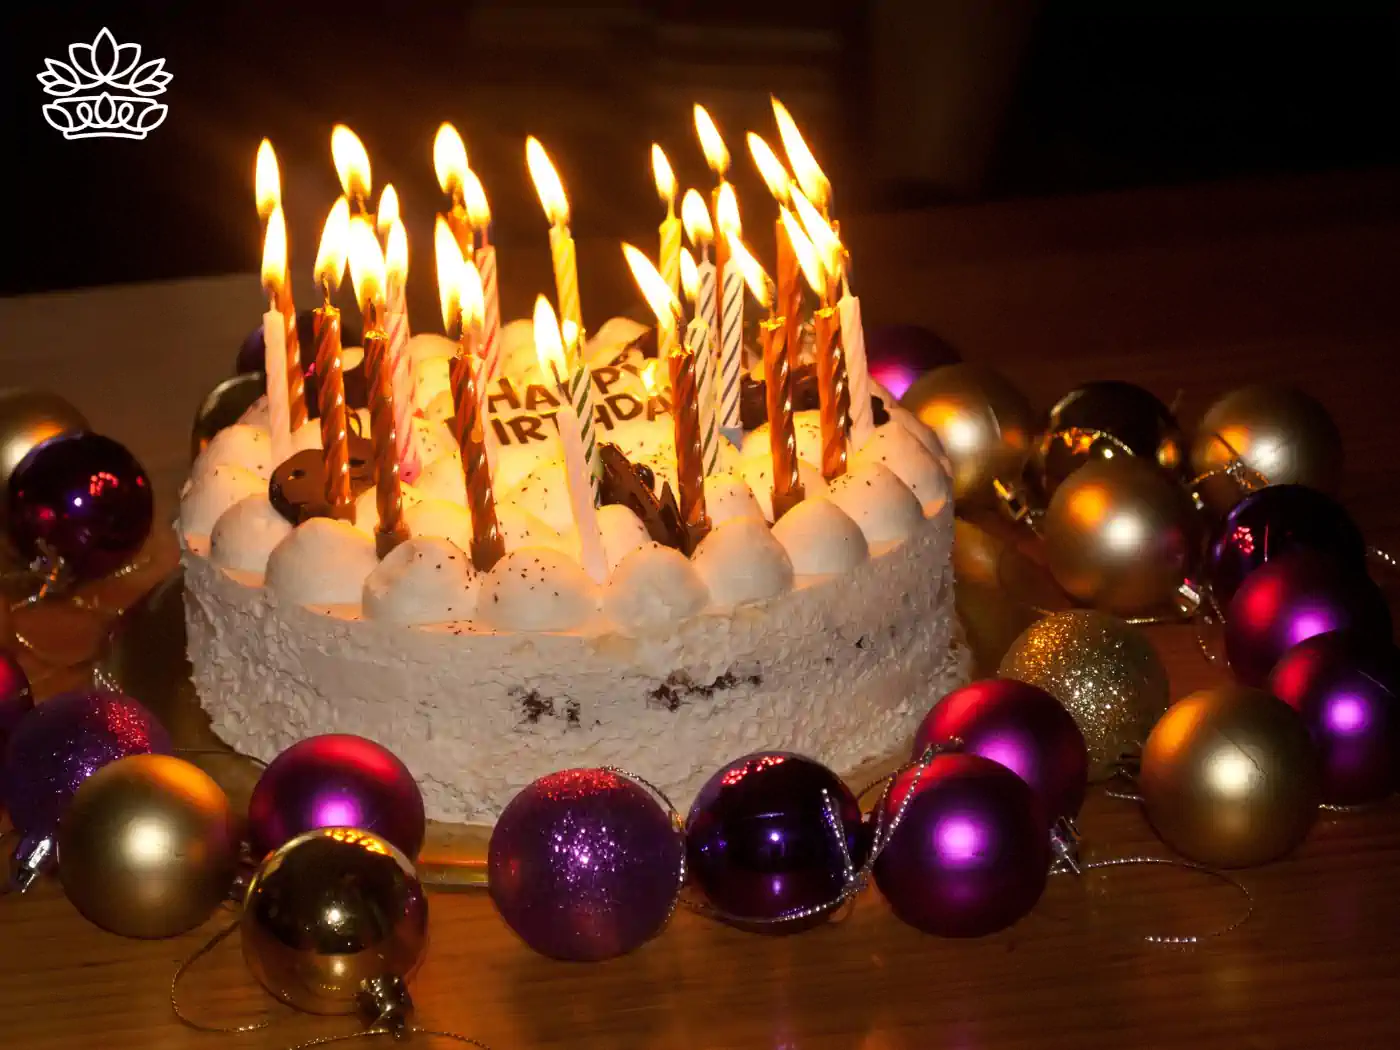 A birthday cake with candles lit, surrounded by festive decorations - Fabulous Flowers and Gifts.